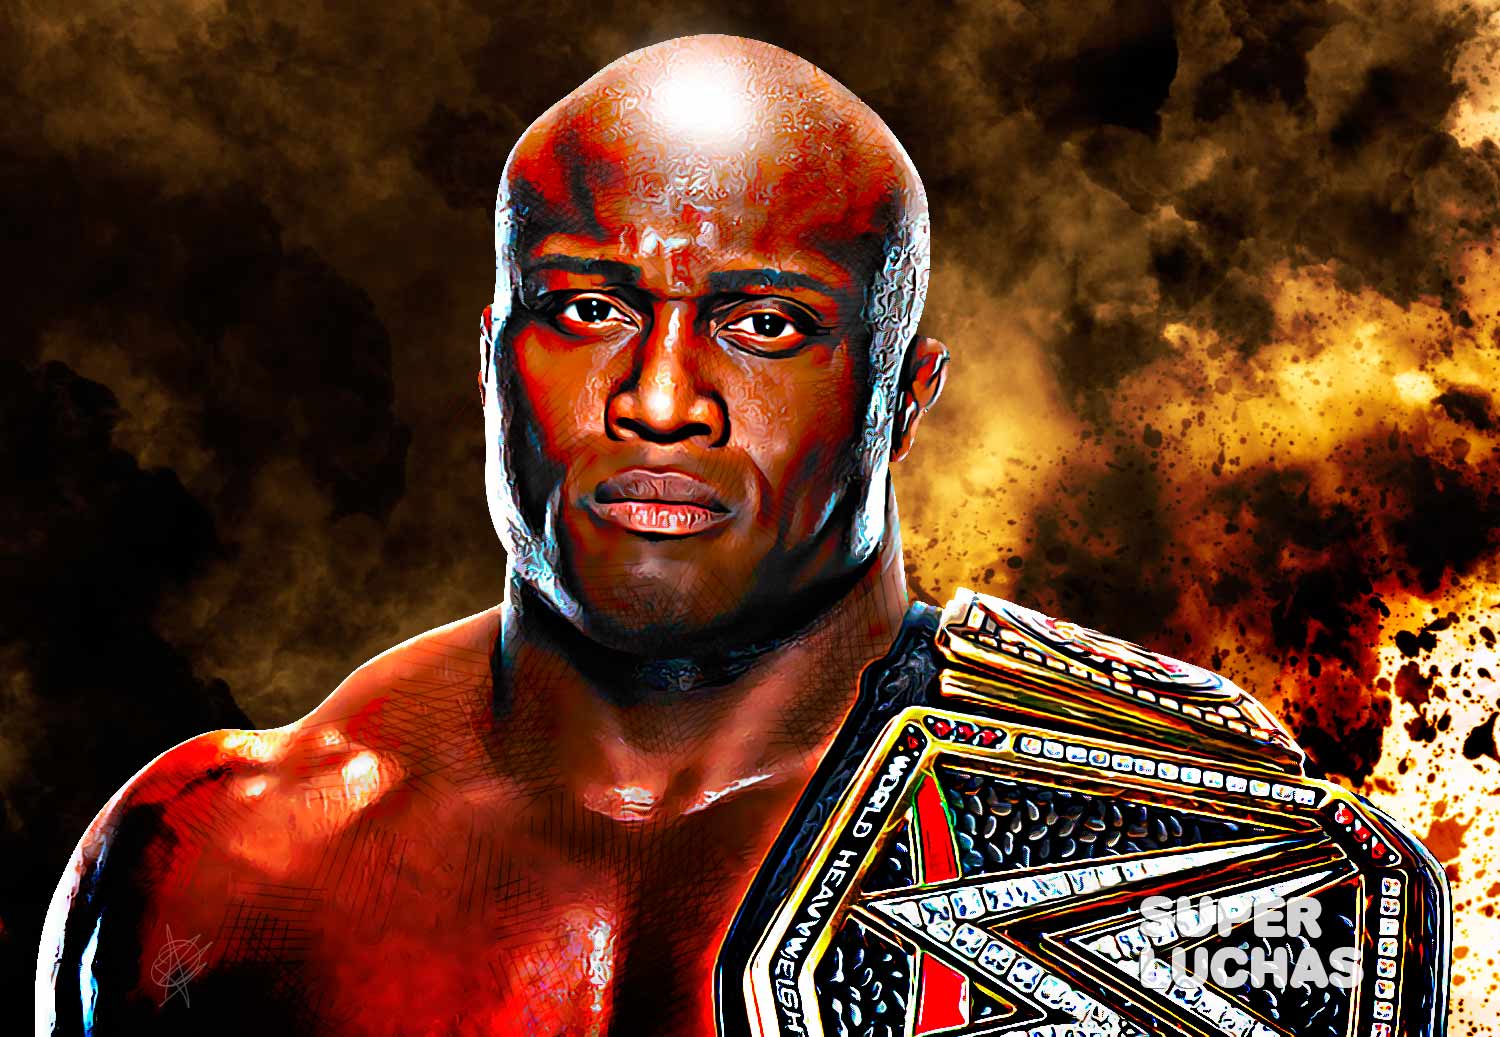 1643660401 Bobby Lashley will defend the title in Elimination Chamber